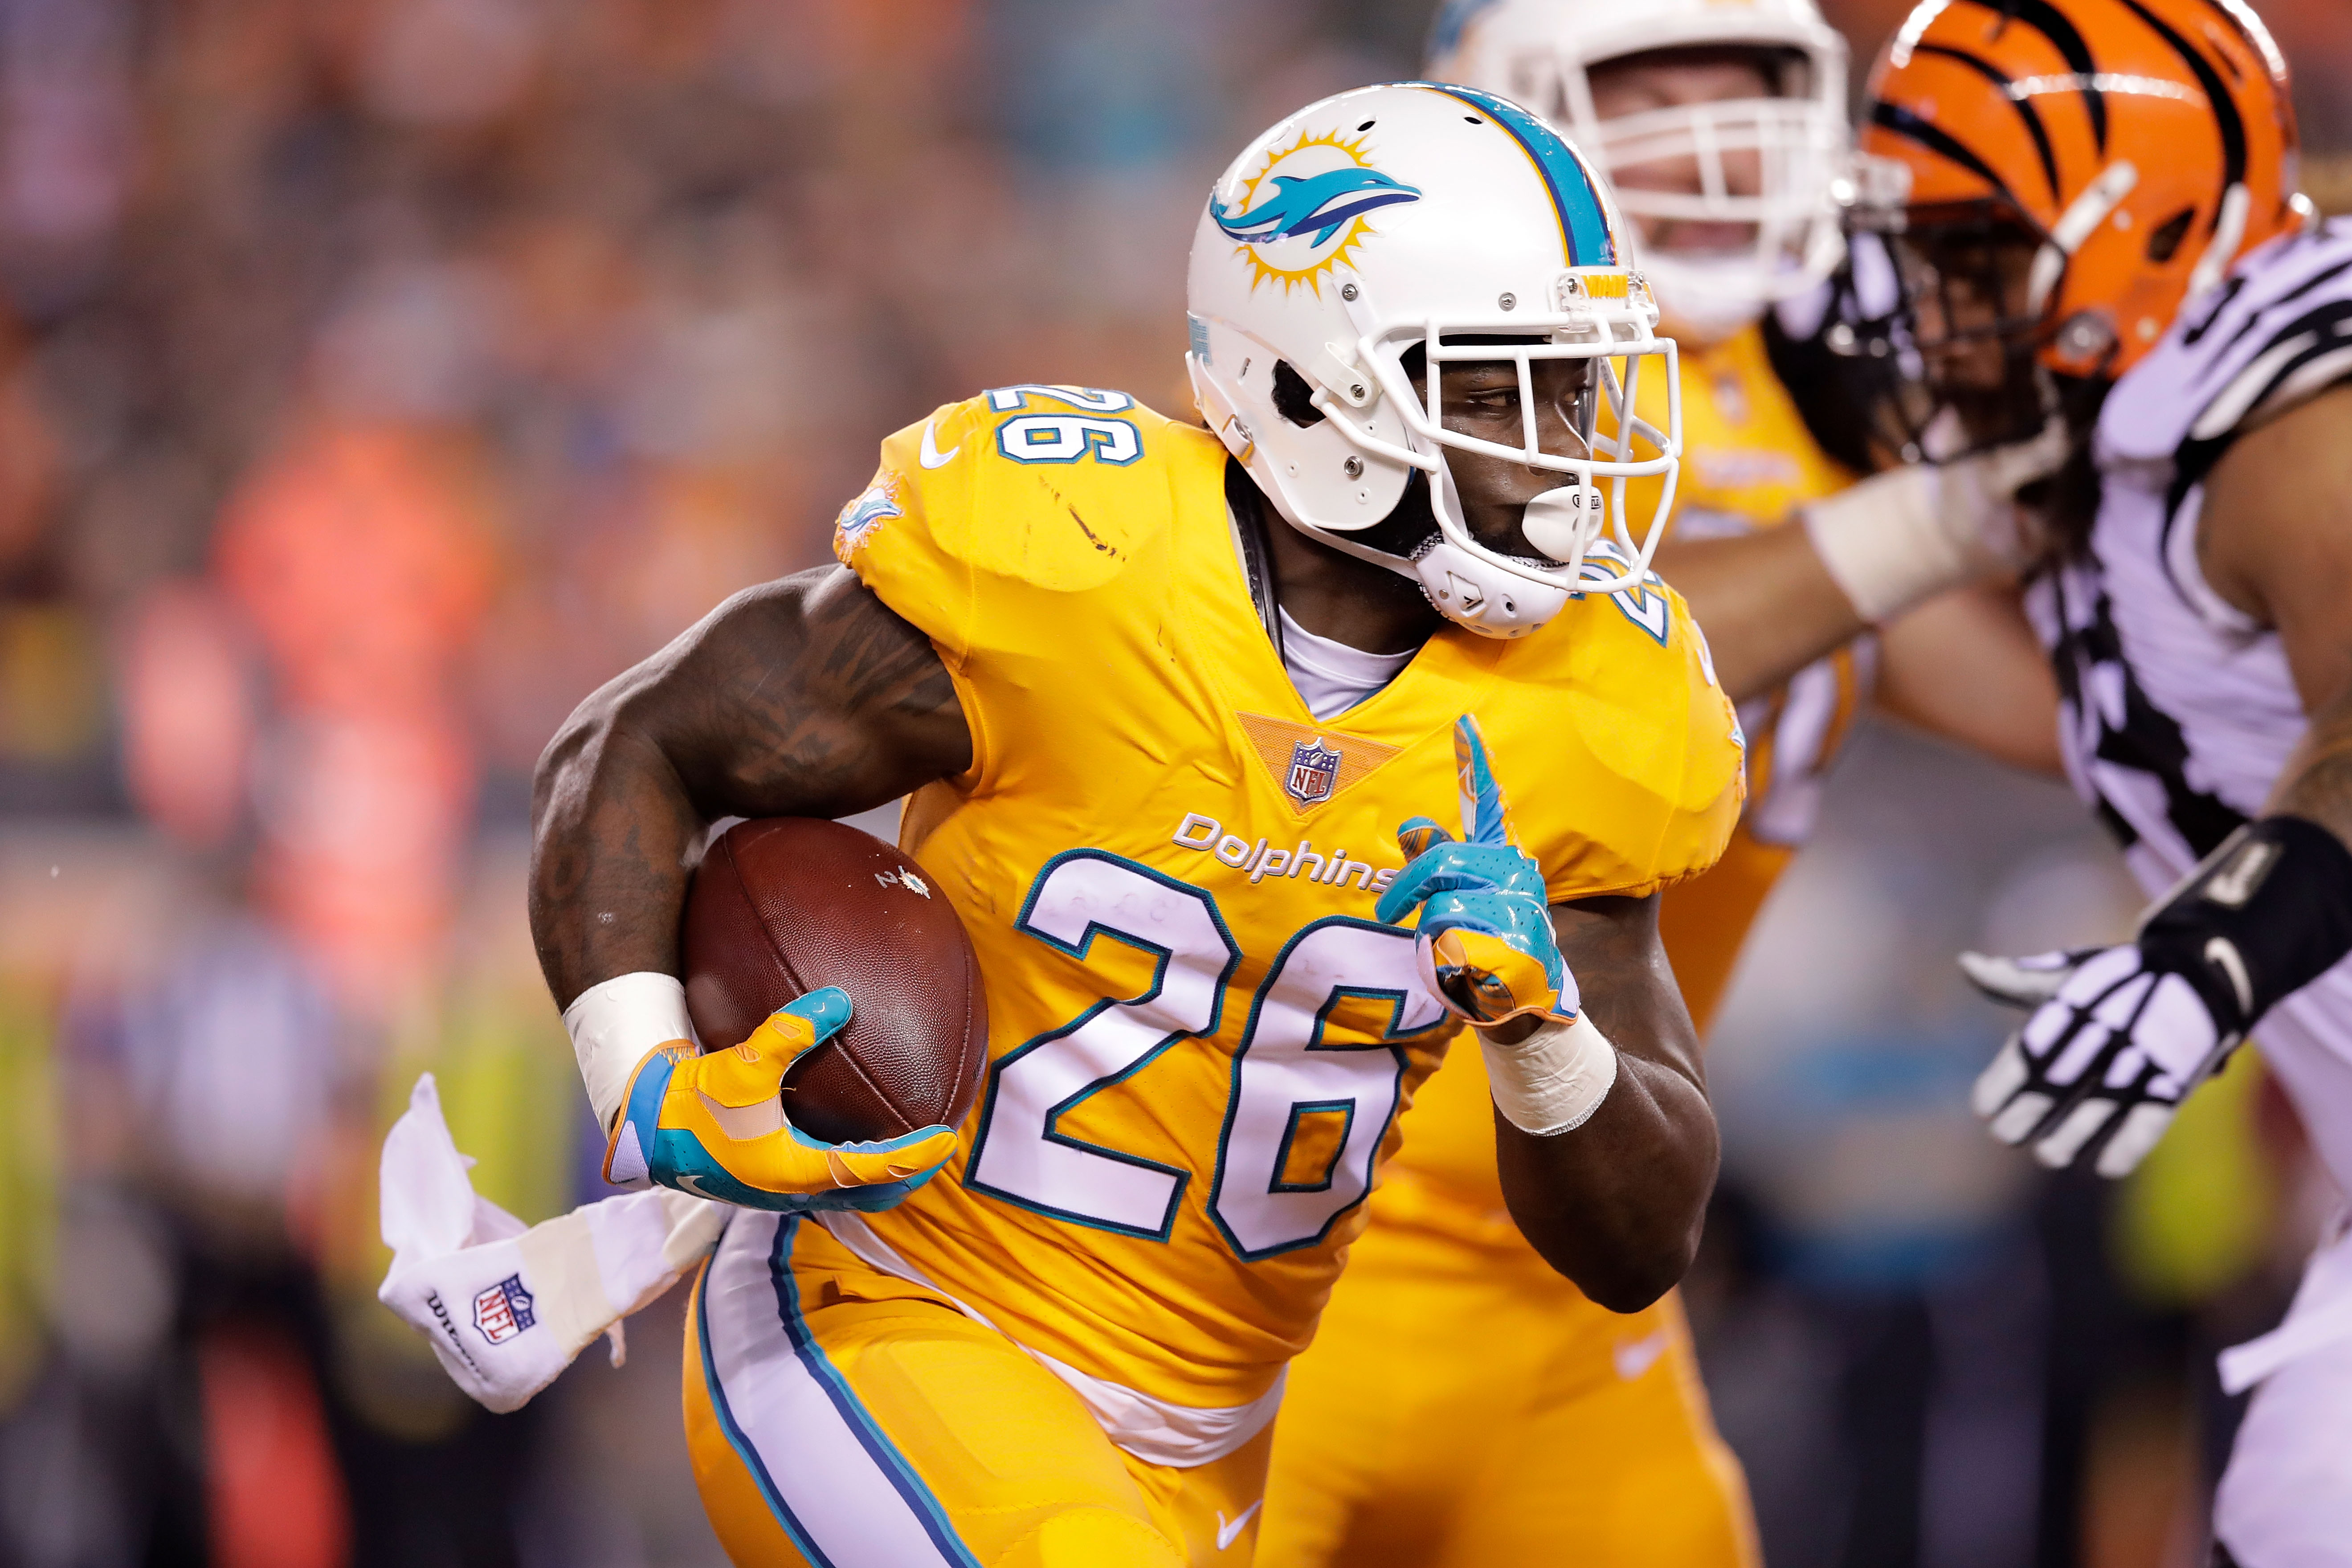 Dolphins vs. Bengals: Score, Stats & Highlights